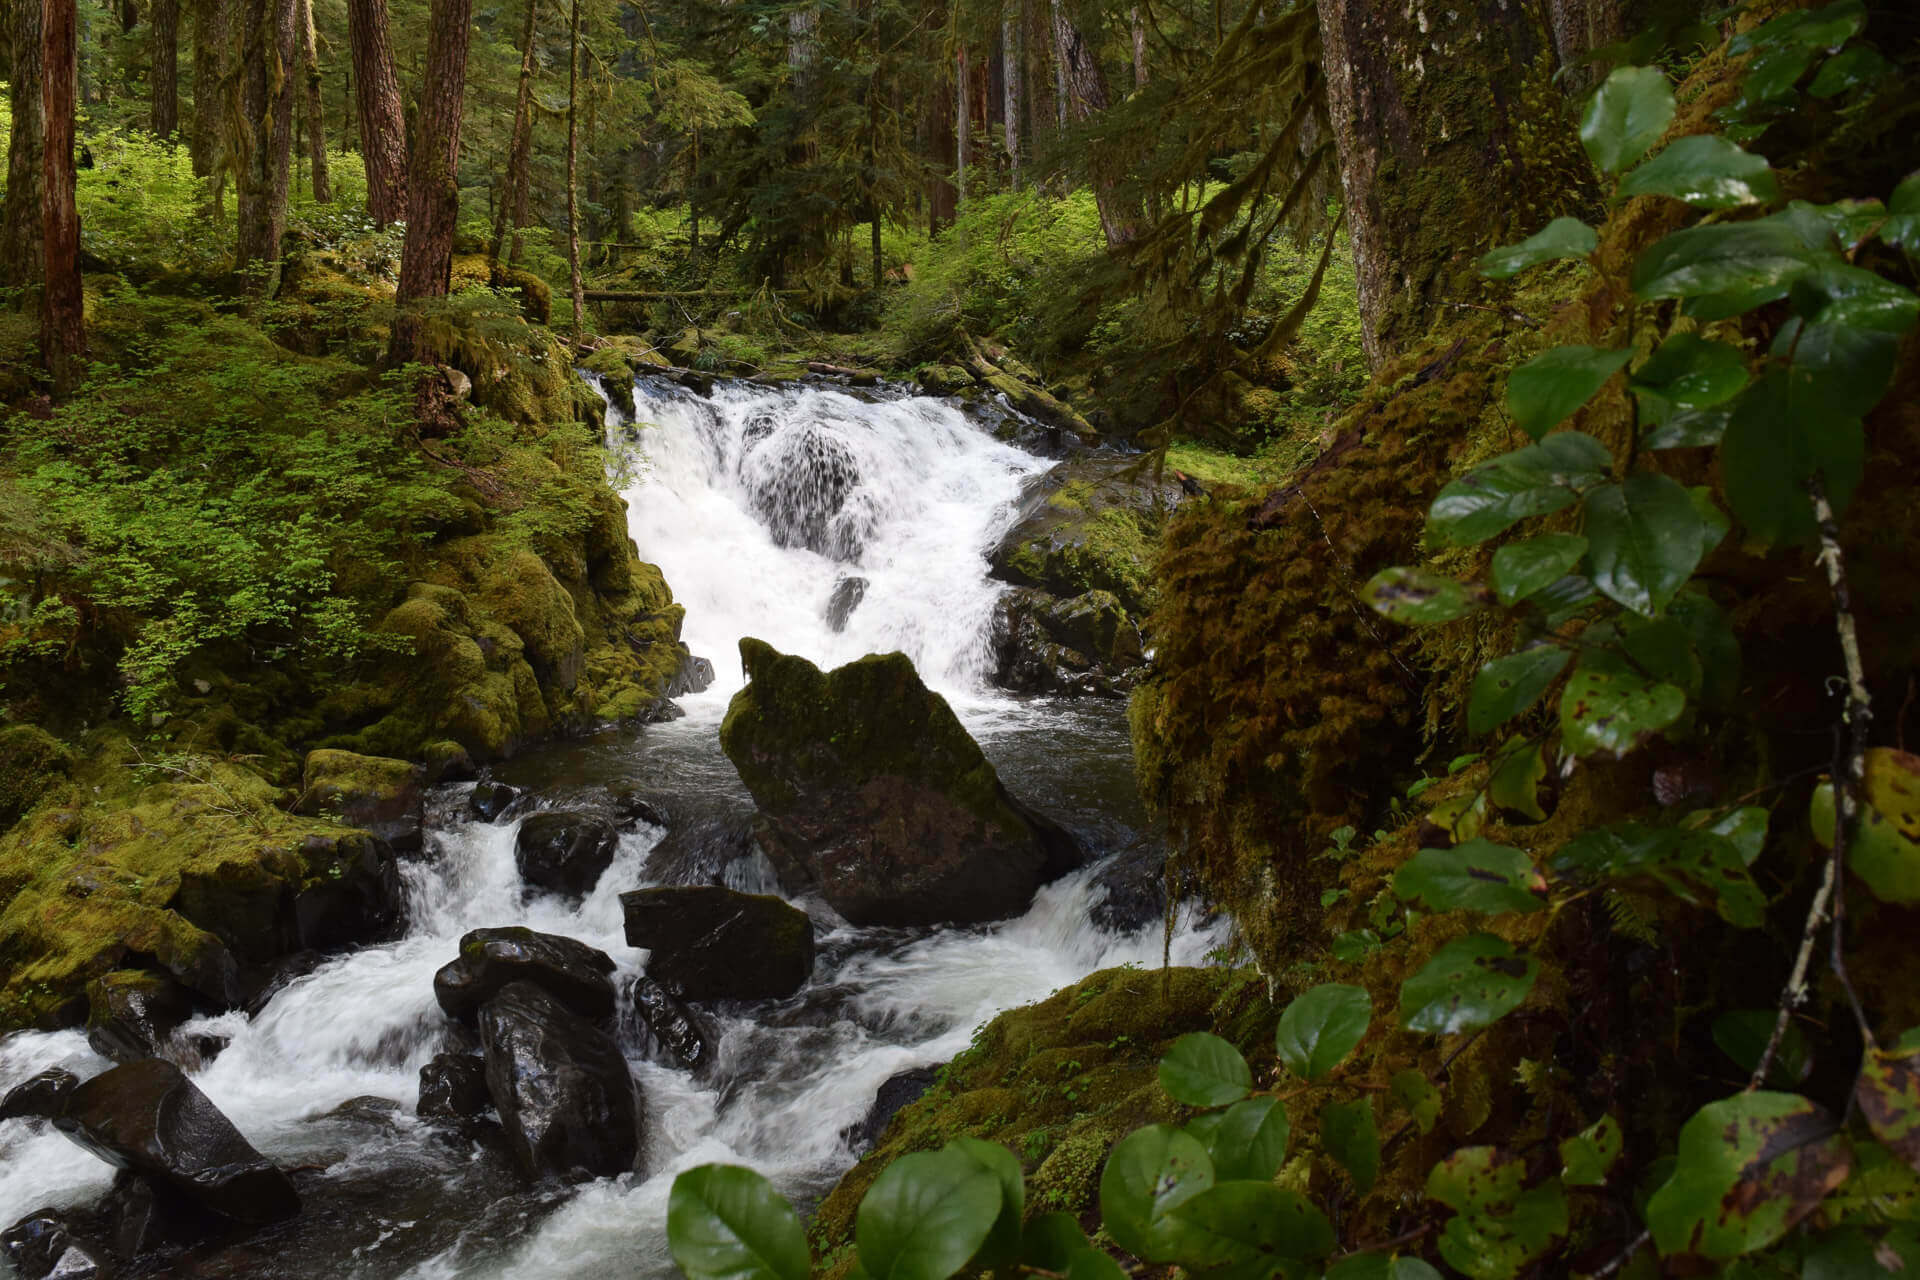 Olympic National Park Hikes - A waterfall flows over rocks in a moss-coverered forest along Lover's Lane trail